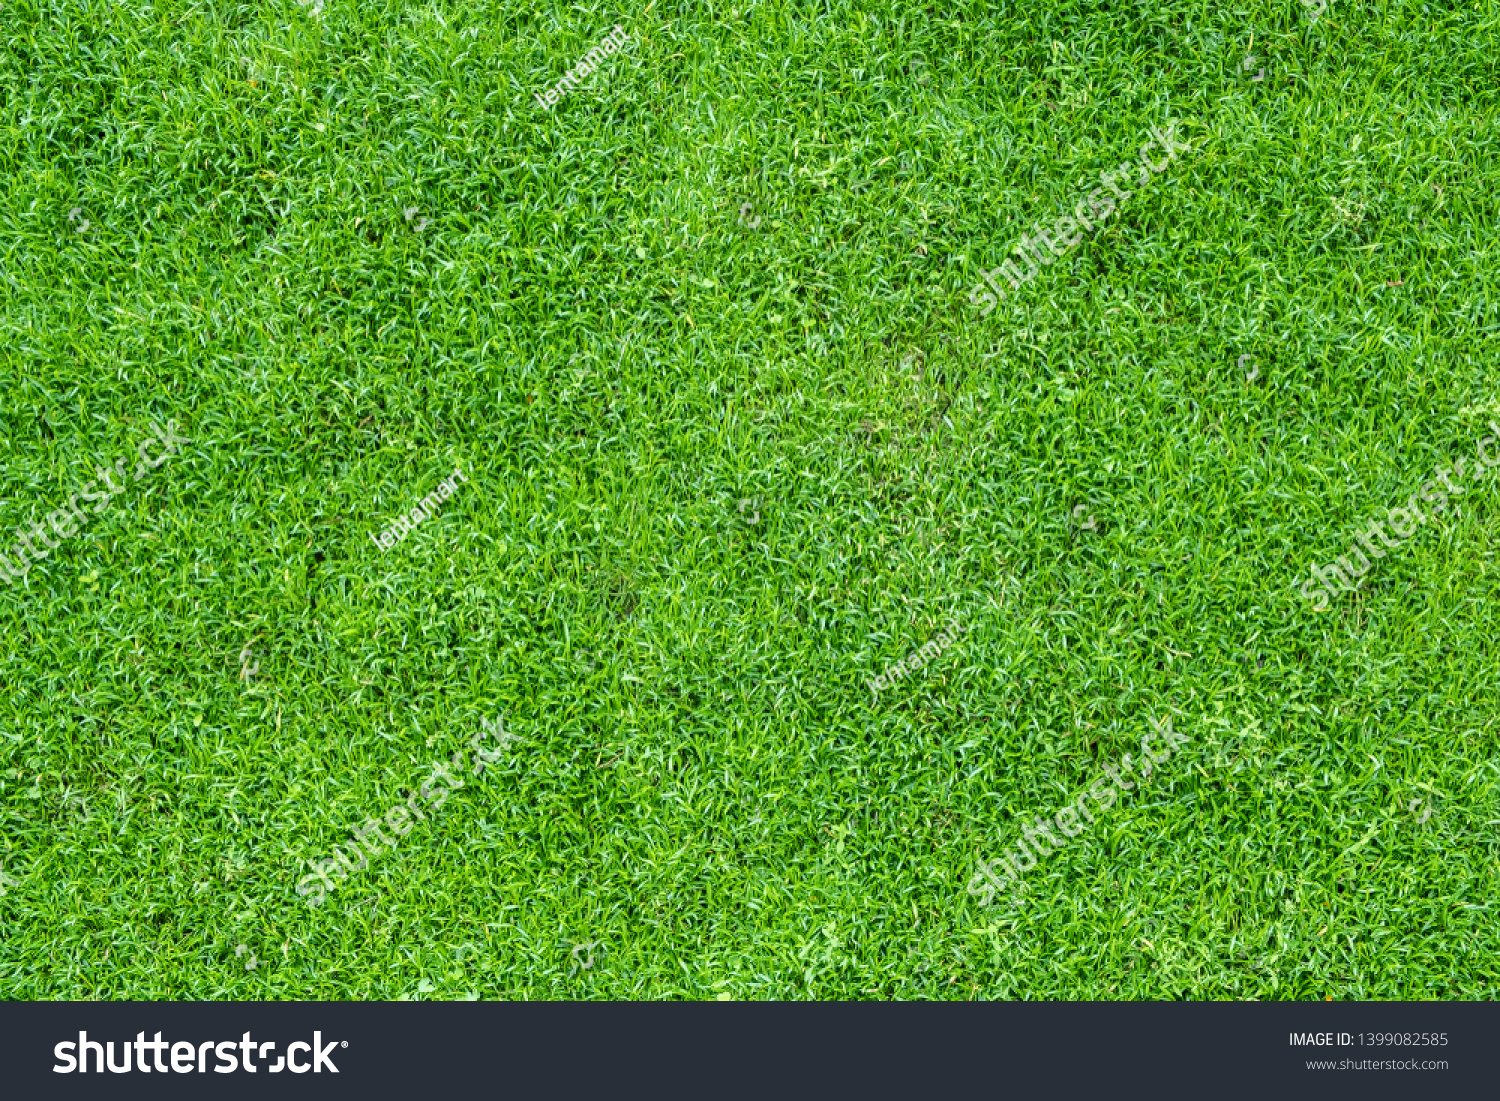 Top view of green grass  #1399082585